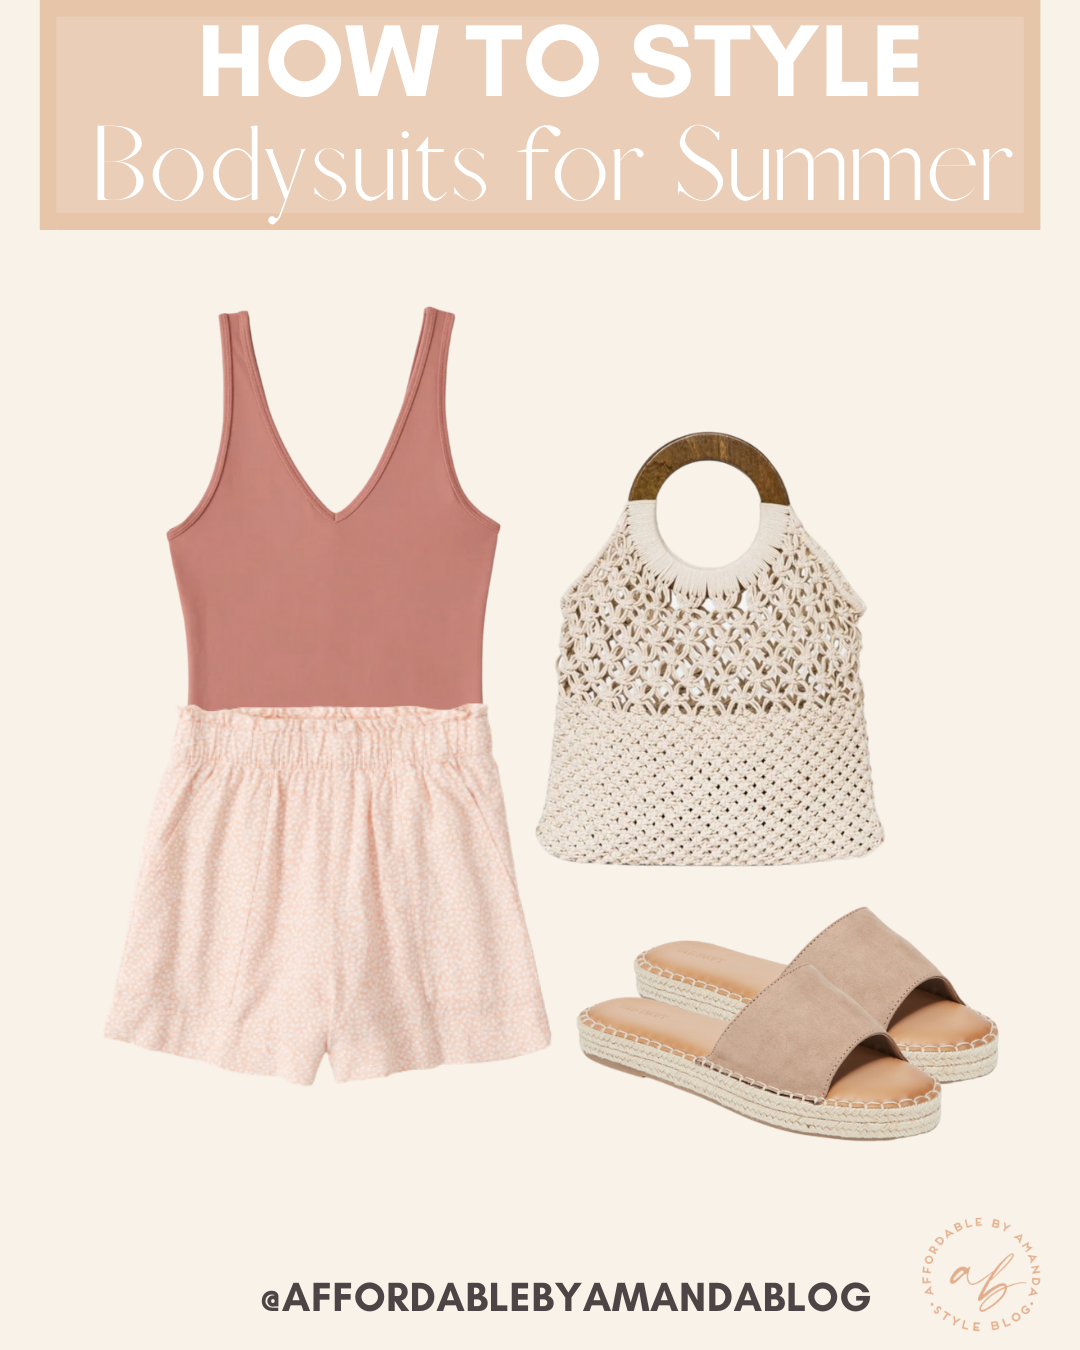 How to Style Bodysuits for Summer | Affordable by Amanda